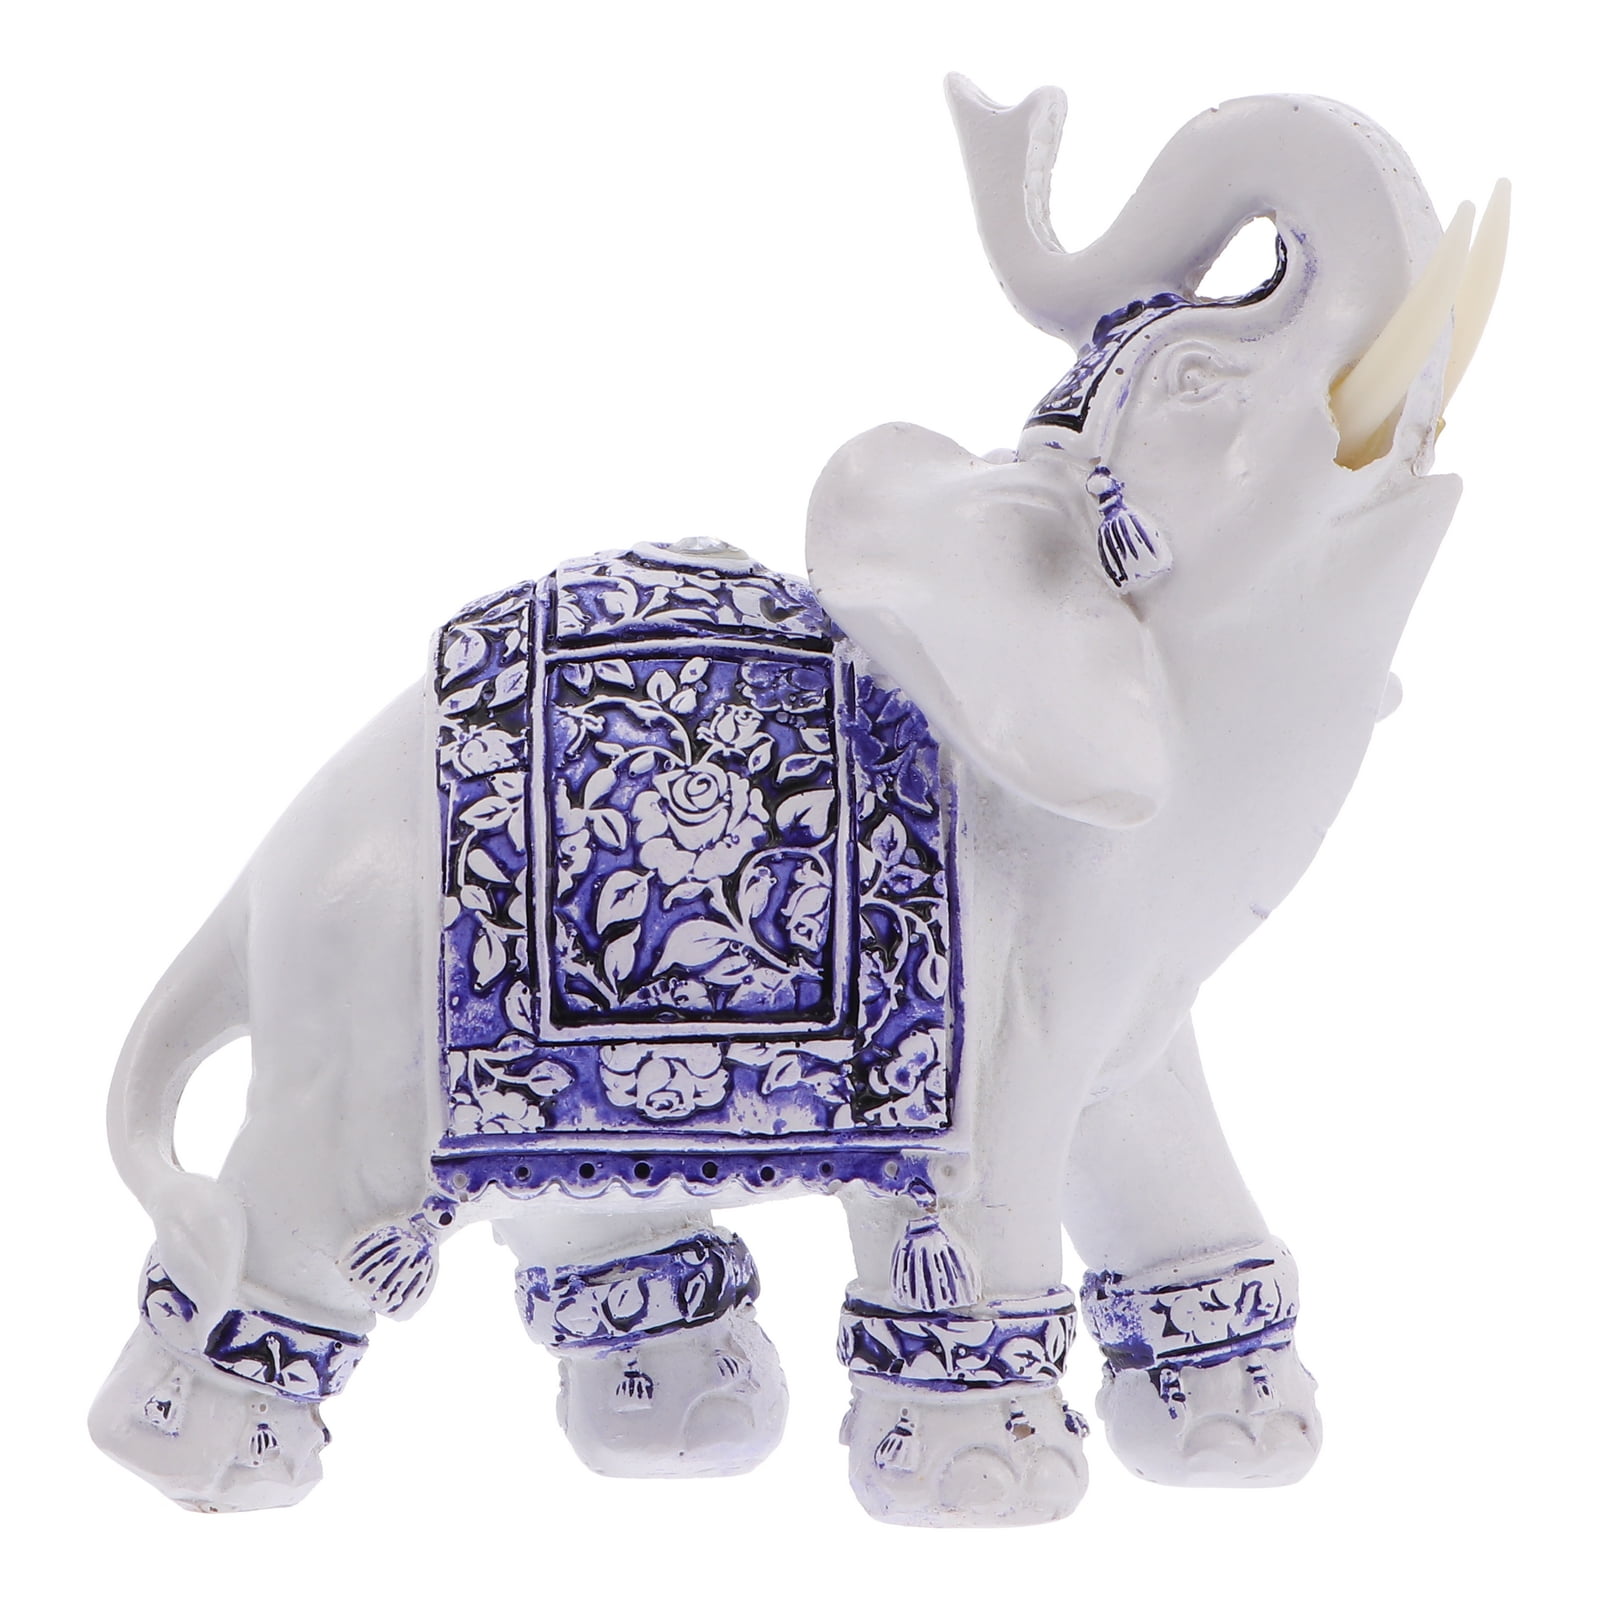 NEW Turkish Hand-Painted Ceramic Elephant Figurine Turqouise 5.75 Inch Trunk Up 